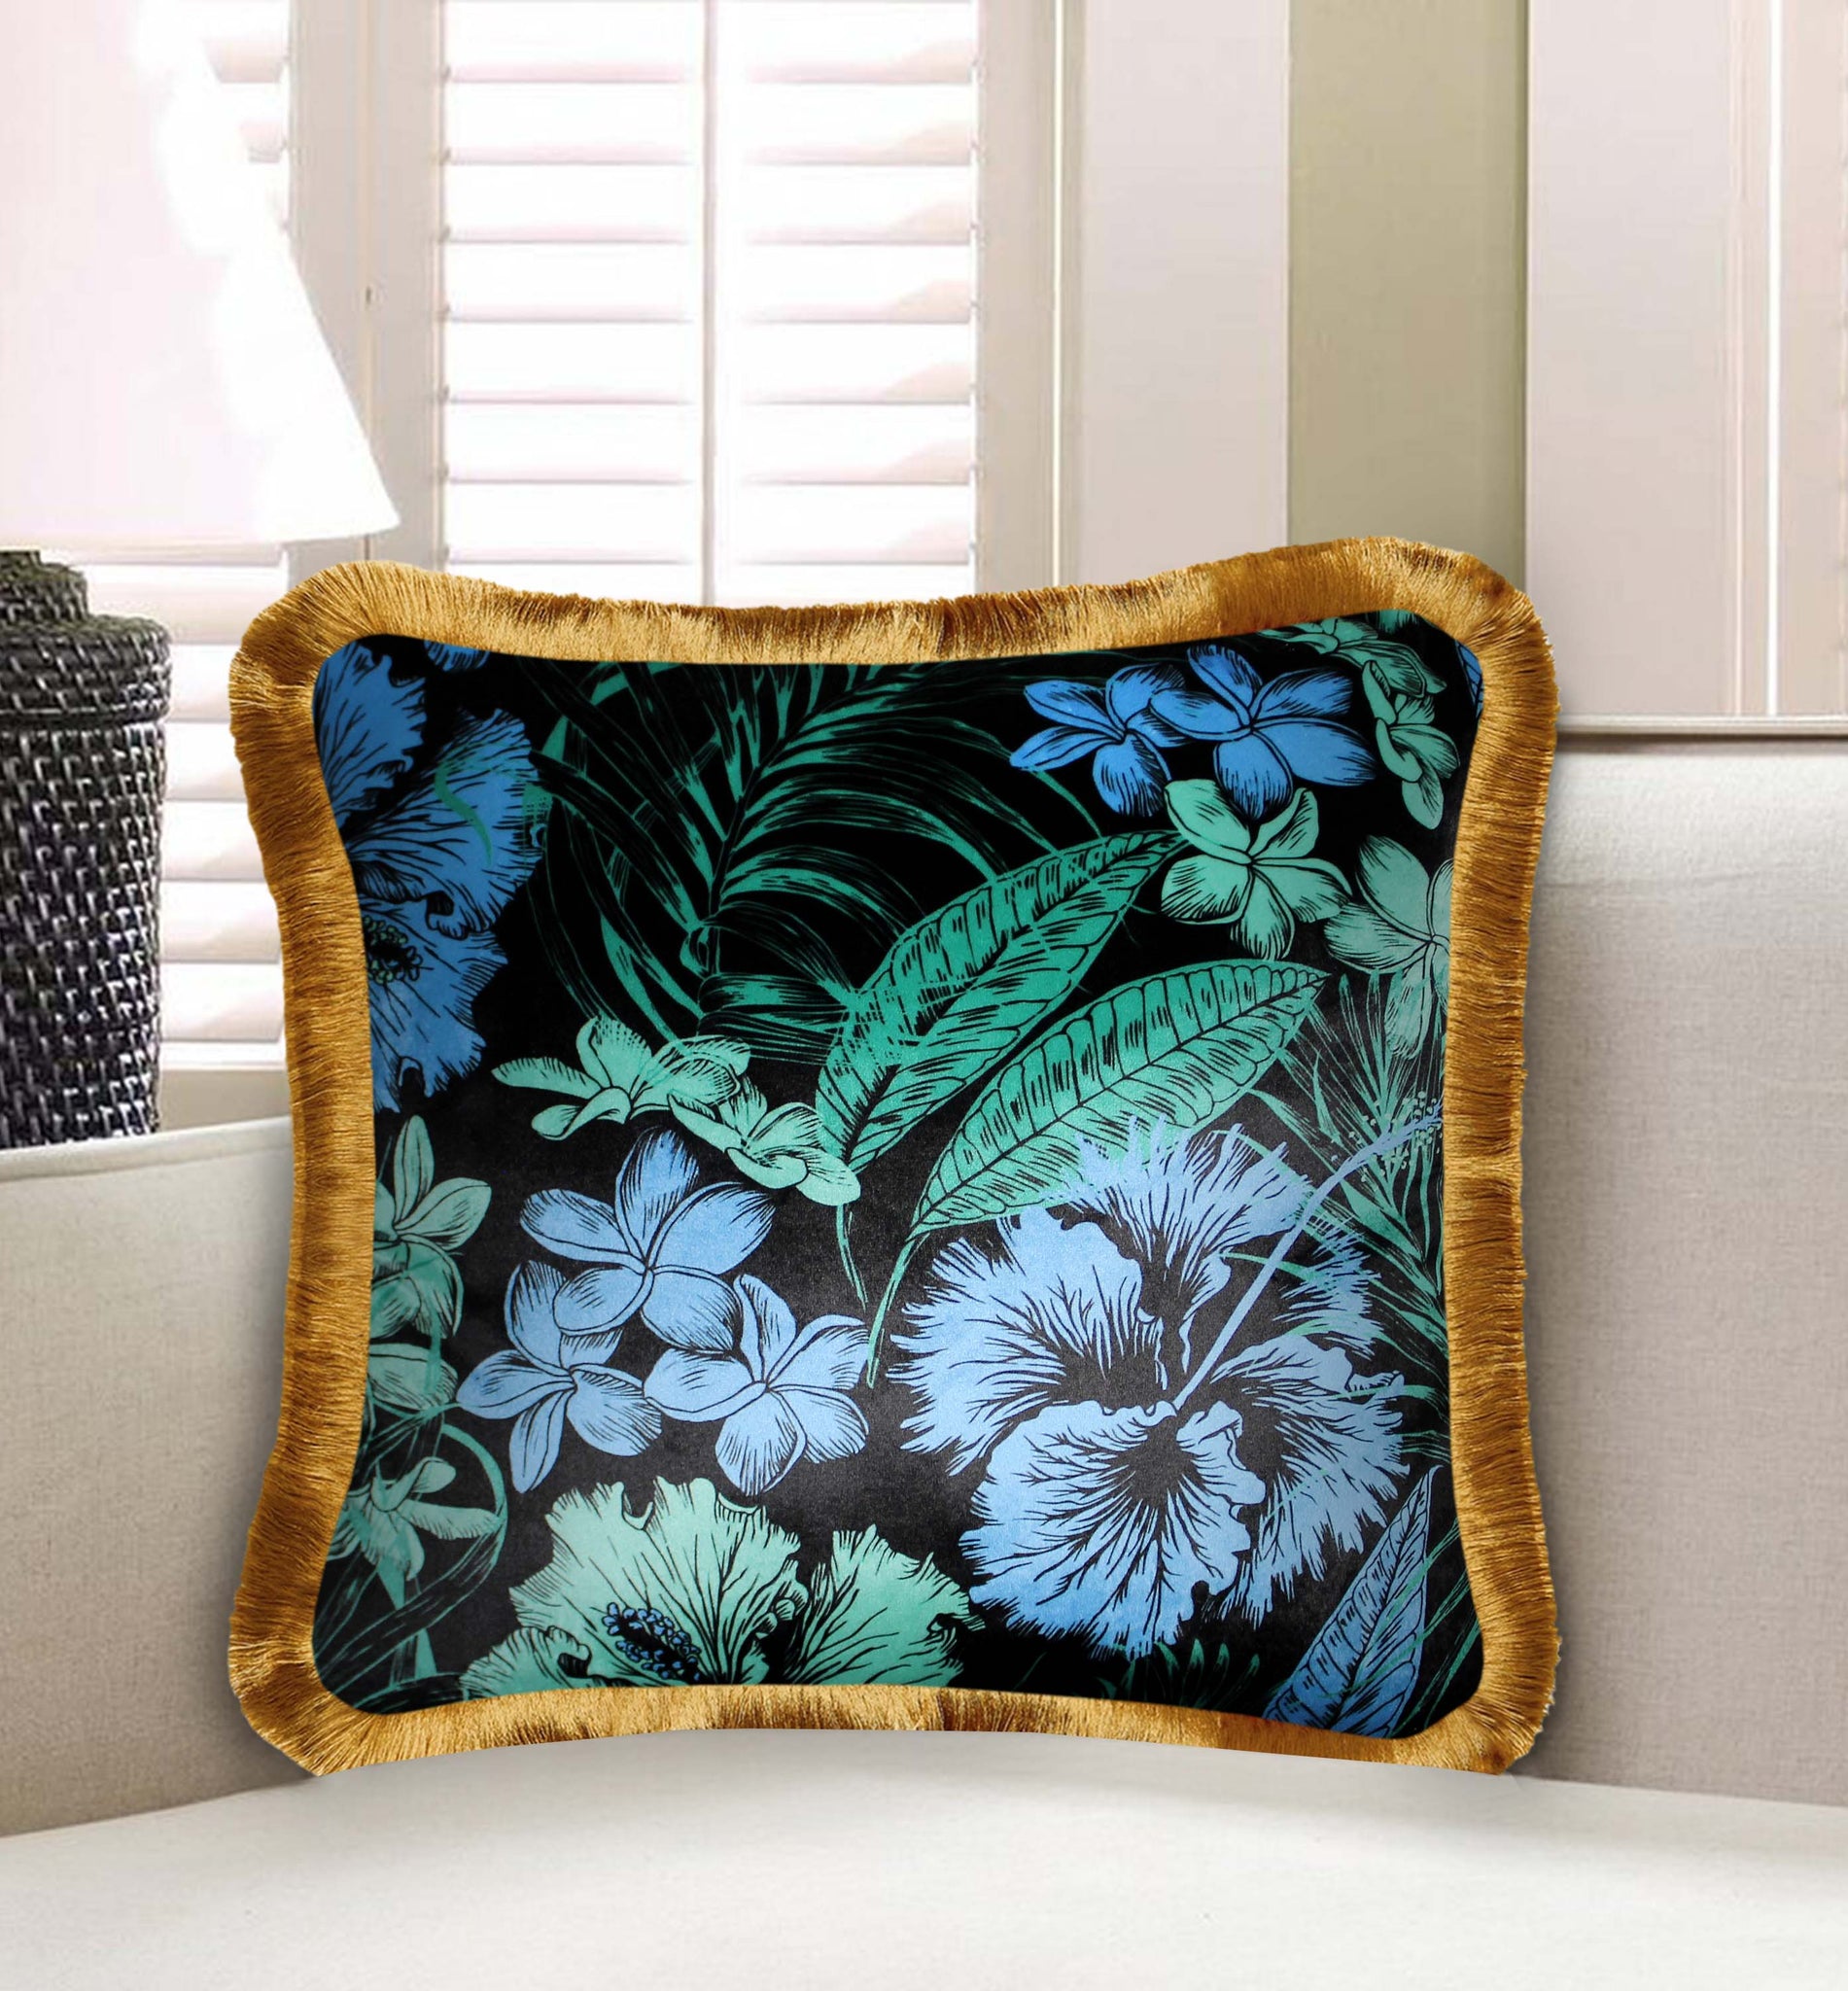 Black Velvet Cushion Cover Exotic Jungle Leaf Decorative Pillowcase Modern Home Décor Throw Pillow for Sofa Chair Couch Bedroom 45x45 cm 18x18 In